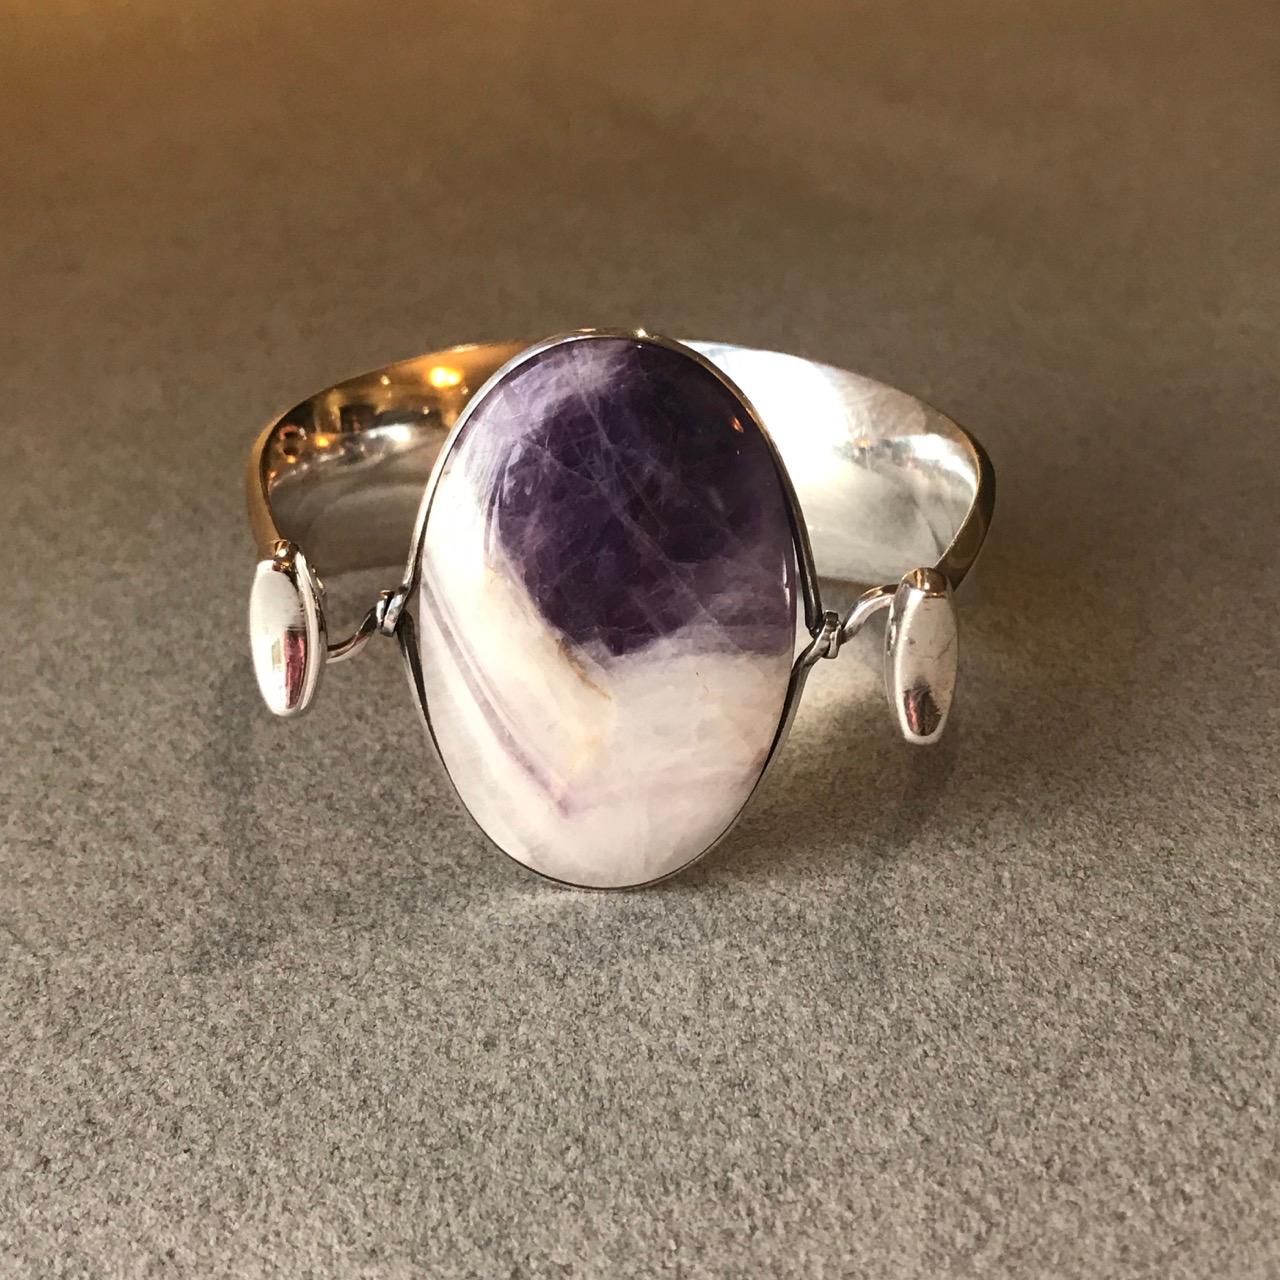 Georg Jensen Sterling SIlver and amethyst Bracelet, No. 203 by Vivianna Torun Bulow-Hube.

Fantastic example of a timeless design. Stone is amethyst in “matrix” showing the beautiful variegation of color.  This piece dates from the 1970's and comes